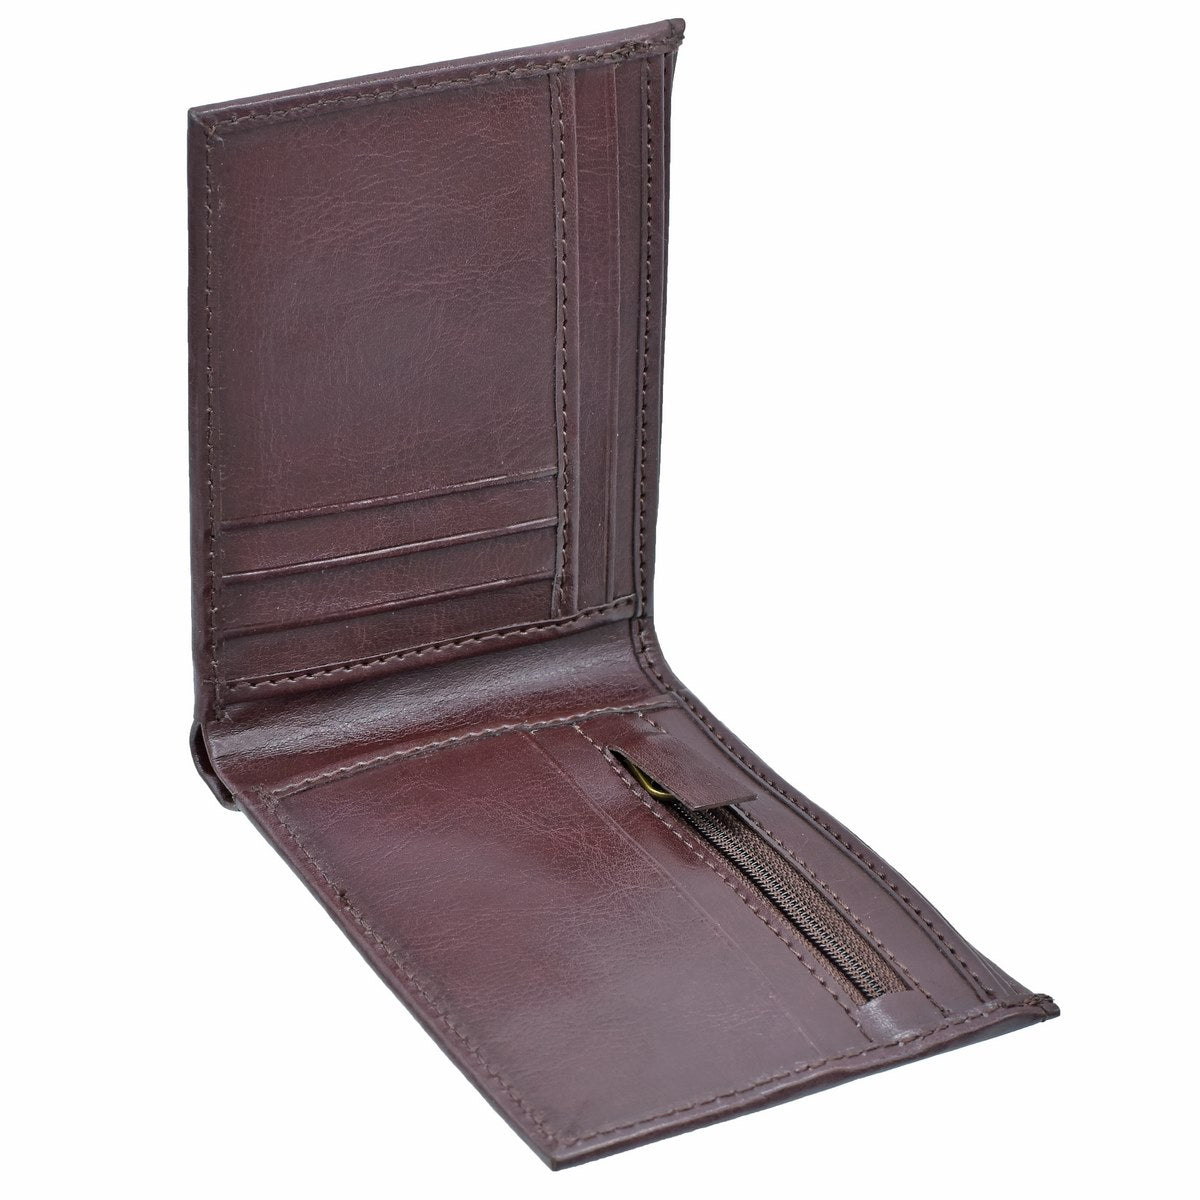 Brown Leather Gents Wallet - For Employee, Corporate, Client or Dealer Gifting, Promotional Freebie, Return Gift JAGW38BN